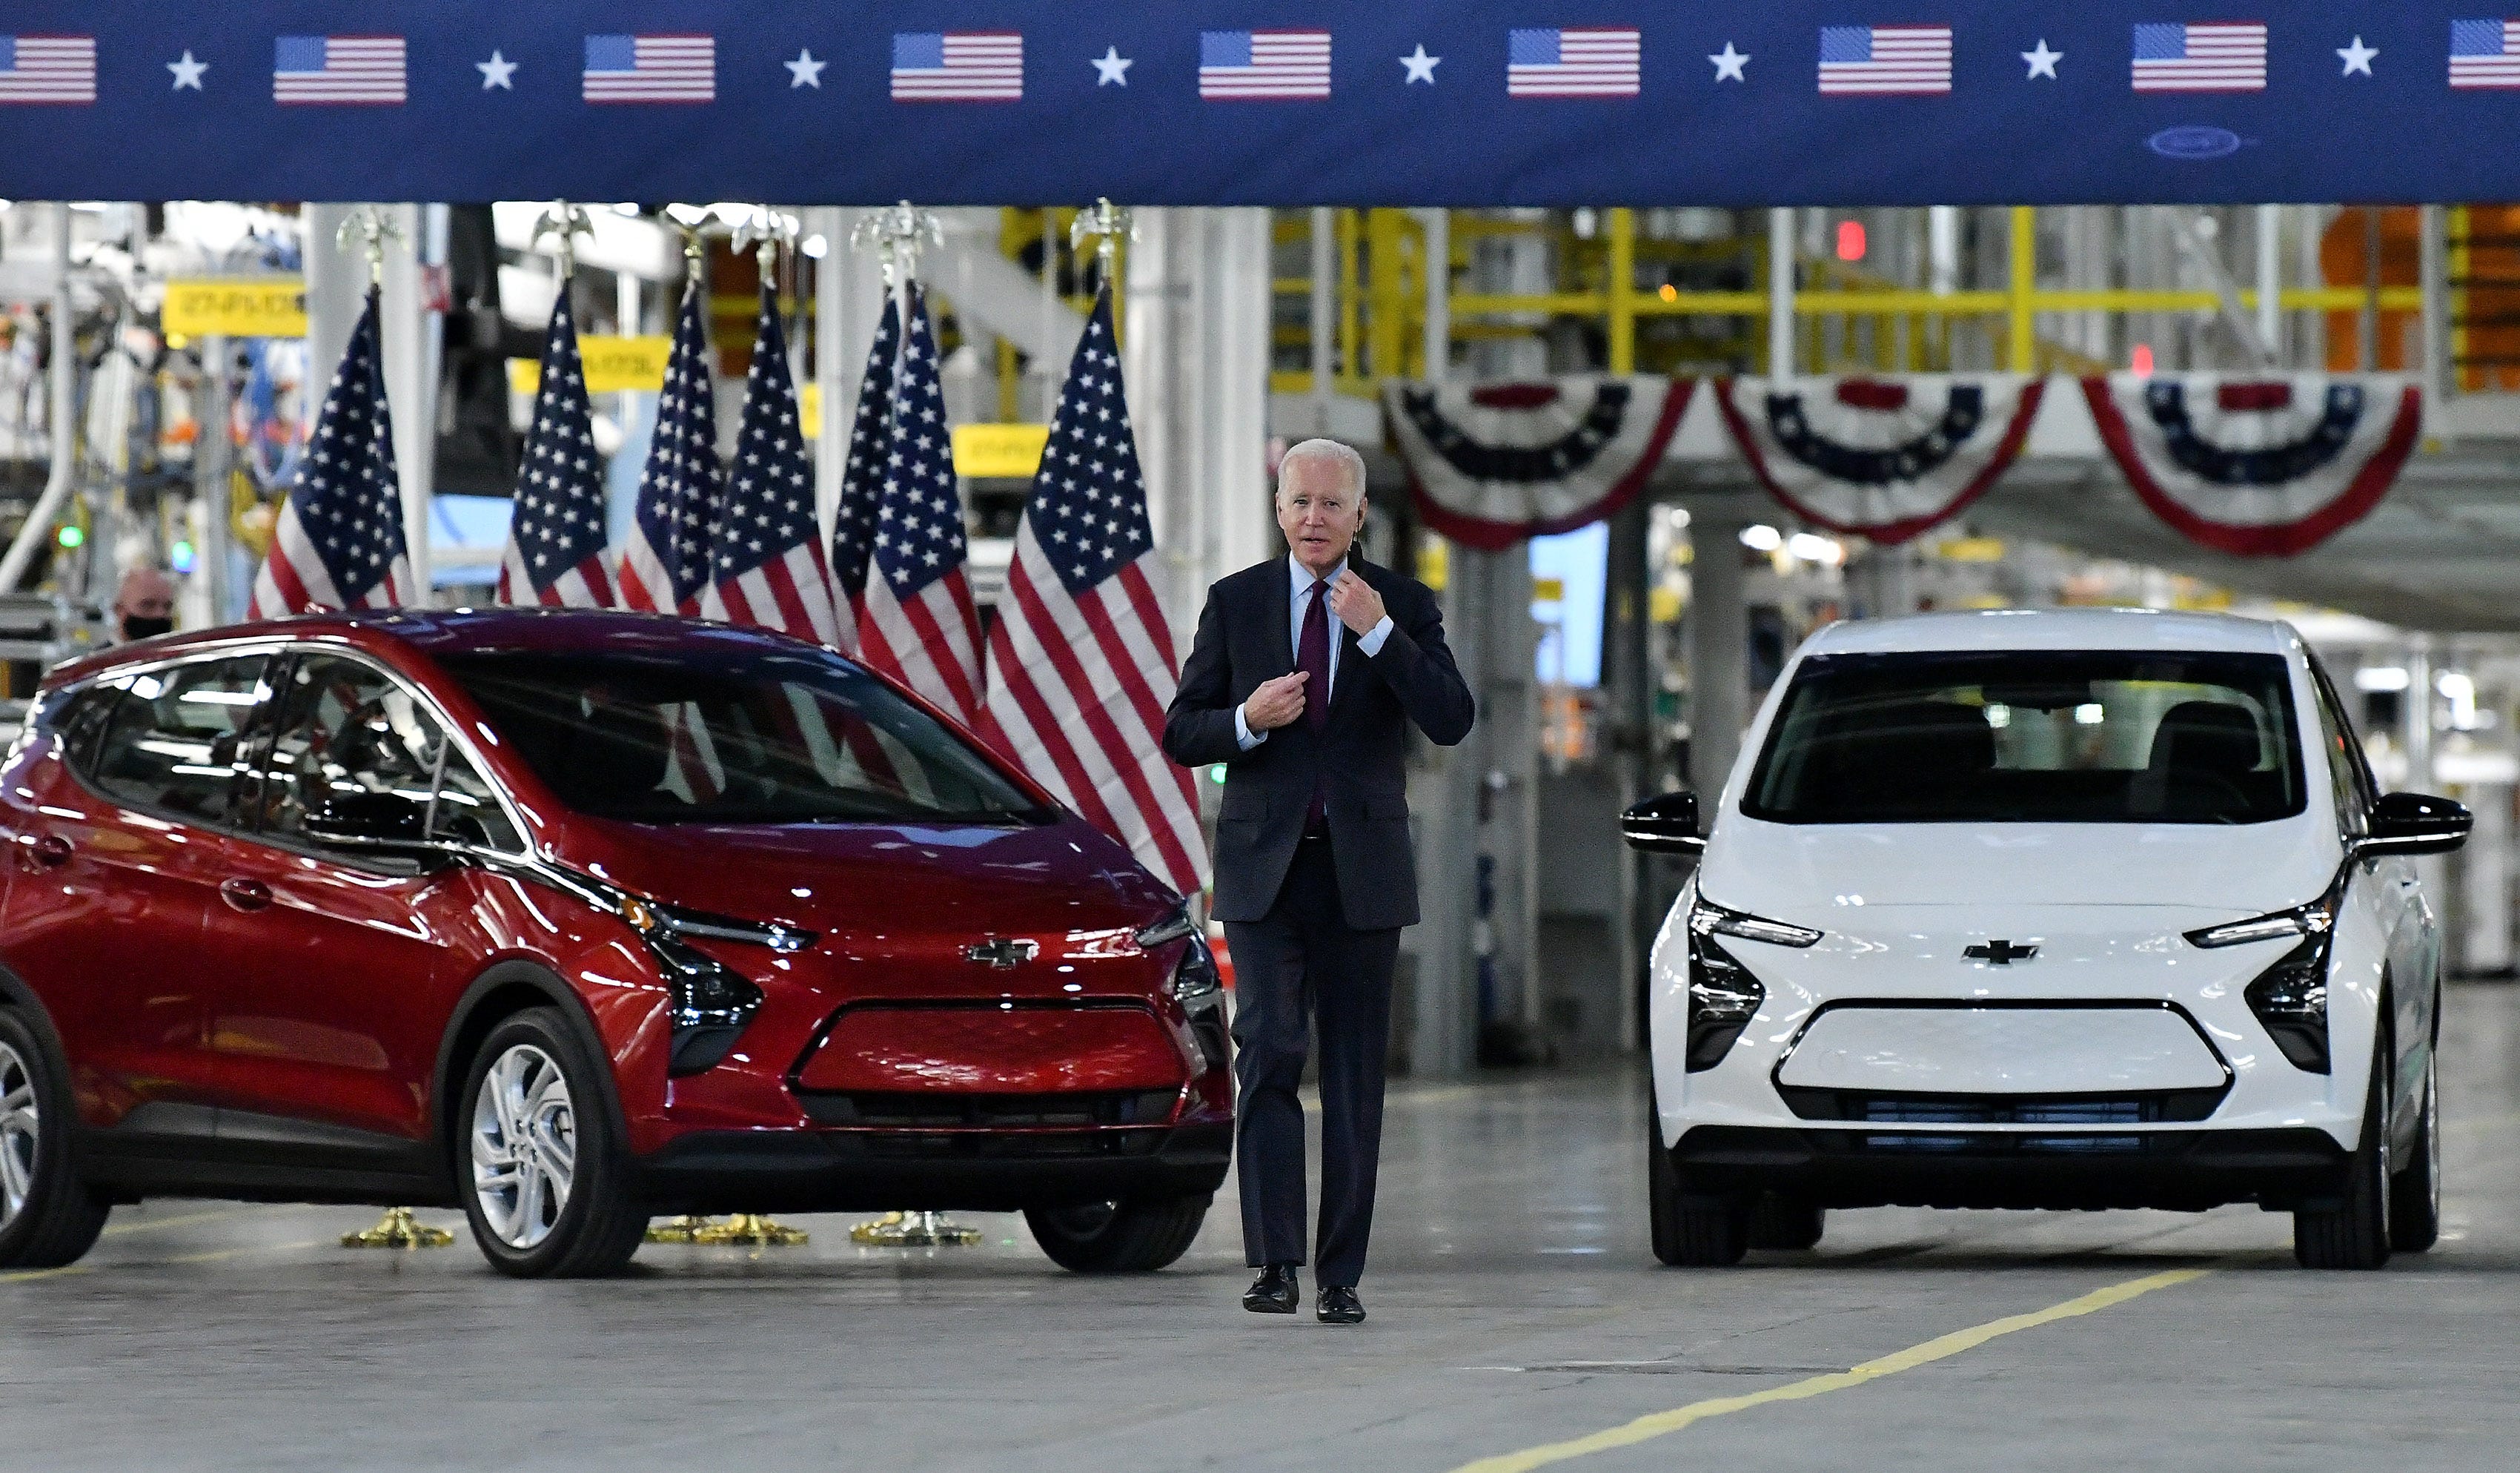 President Joe Biden takes off his mask as he heads for the podium to speak at the General Motors Factory ZERO in Detroit.